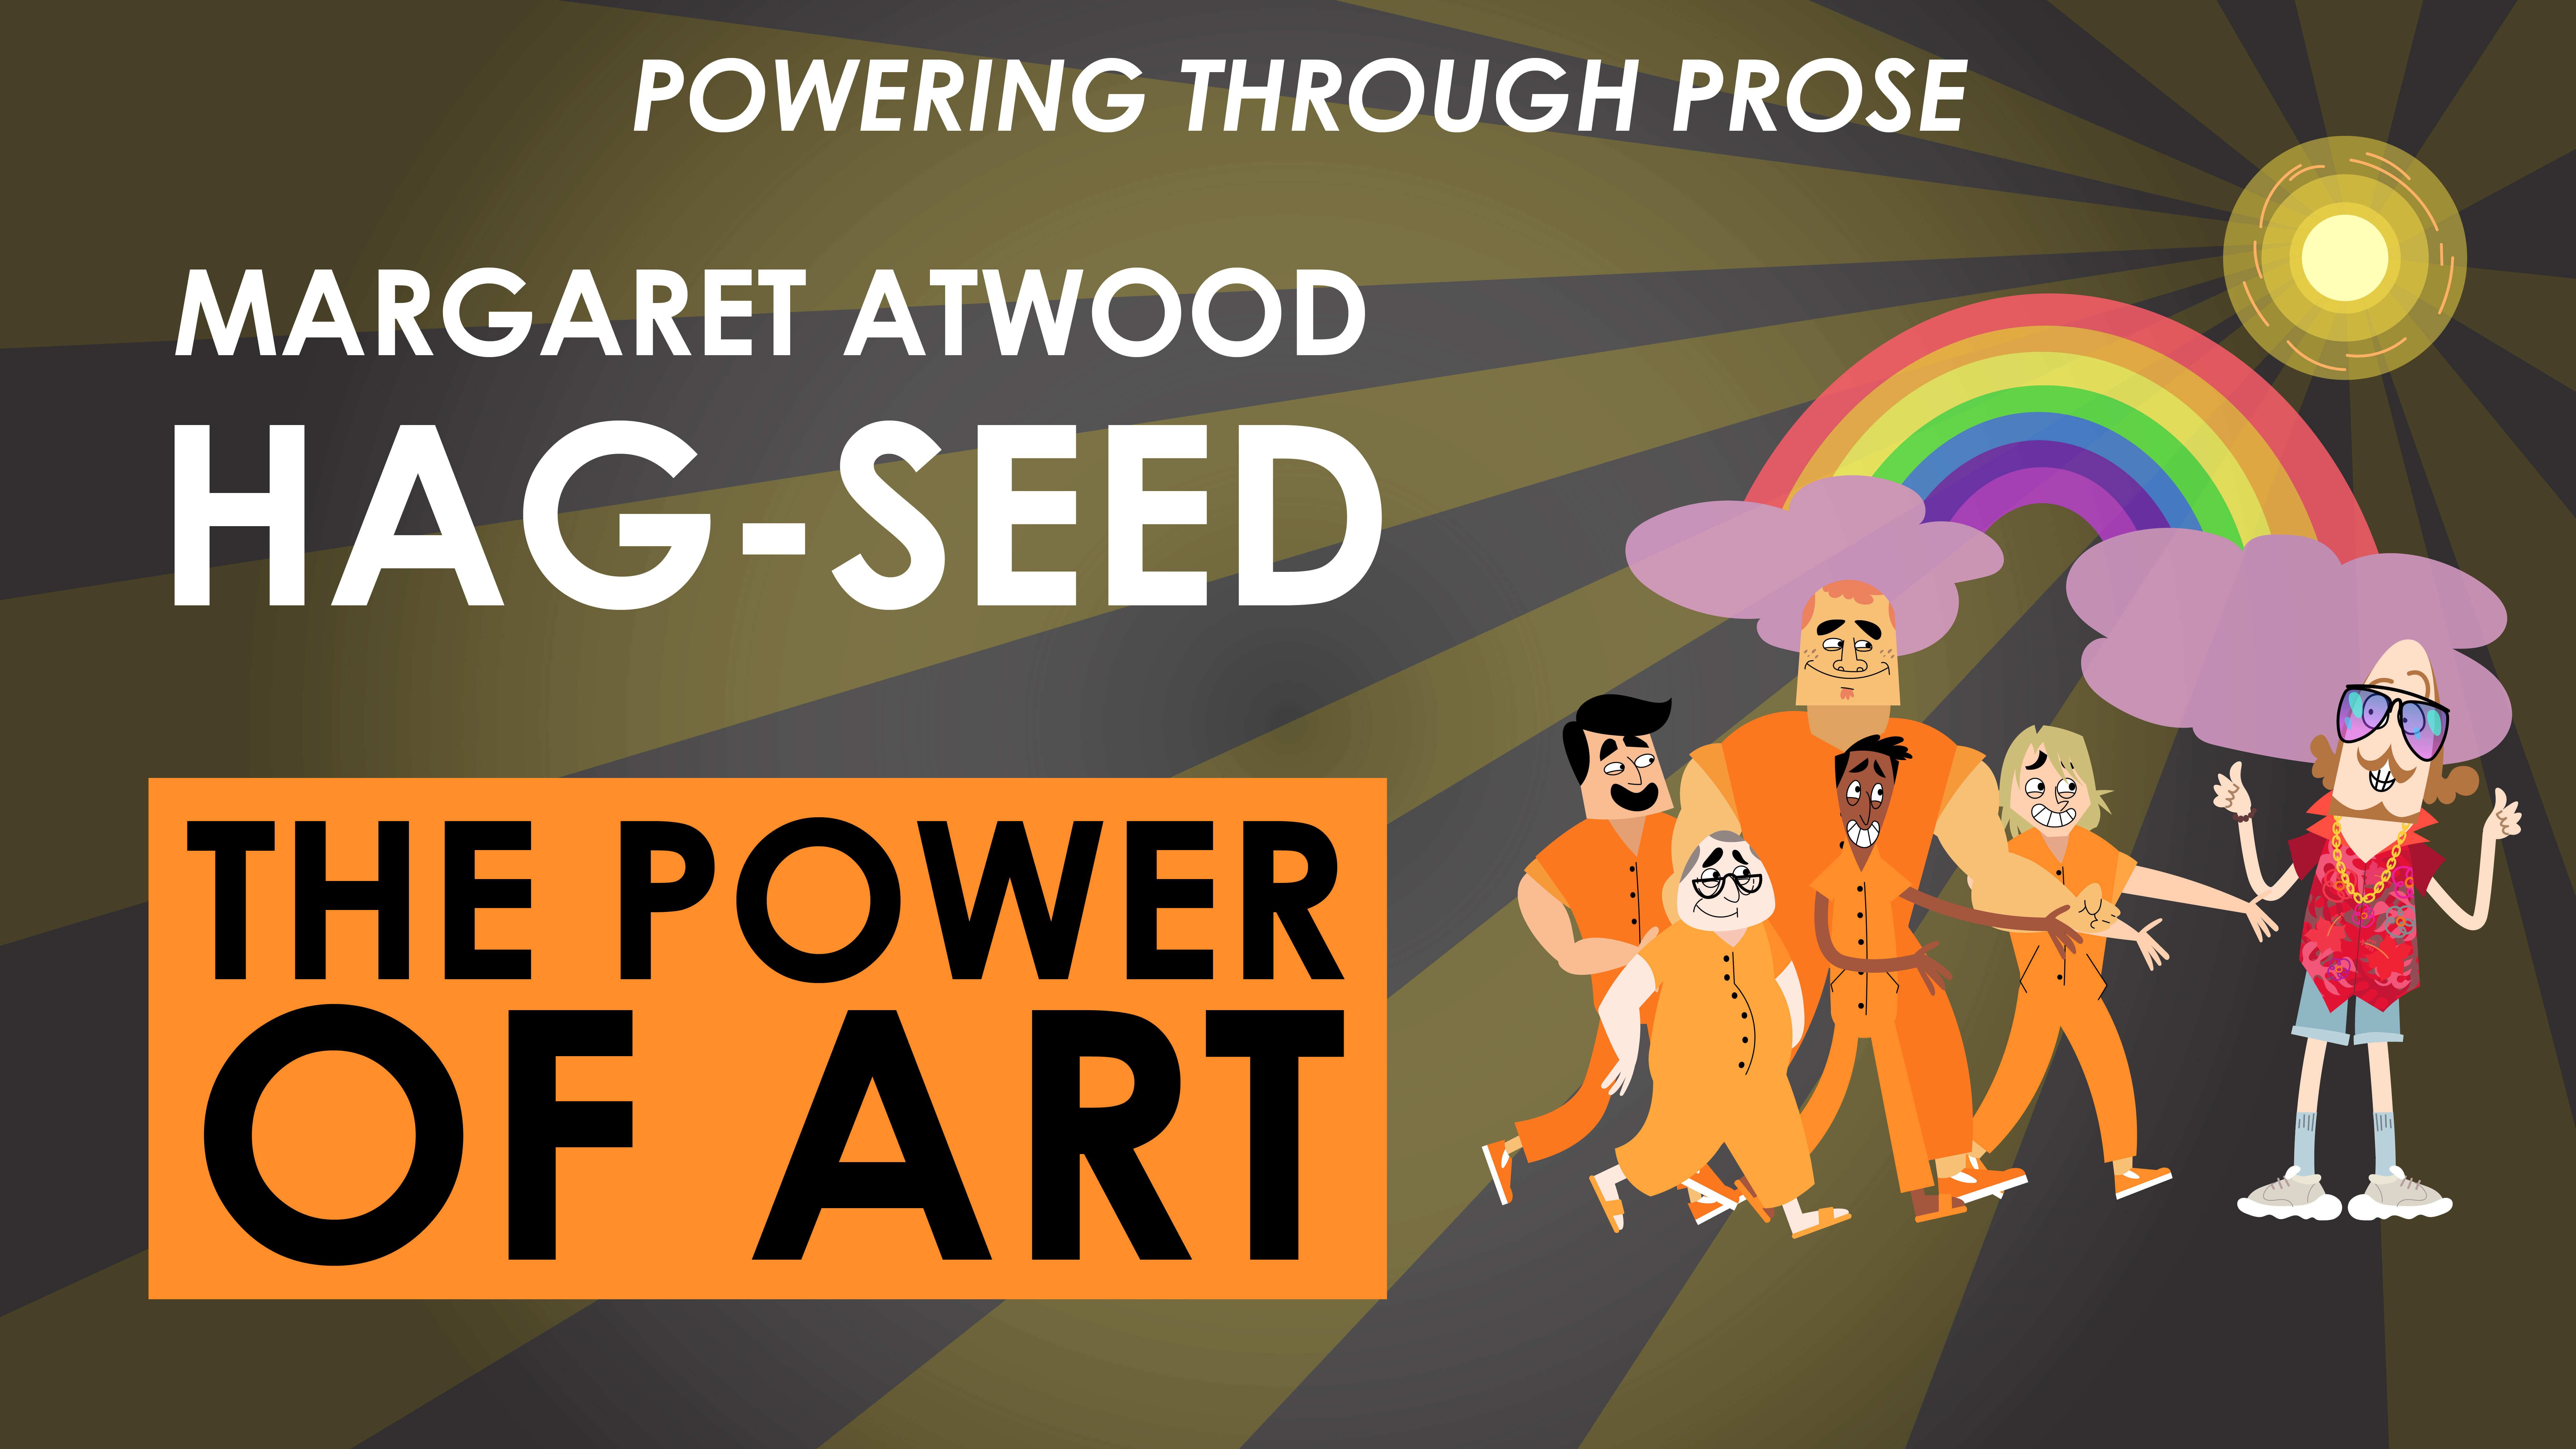 Hag-Seed - Margaret Atwood - The Power of Art - Powering through Prose Series